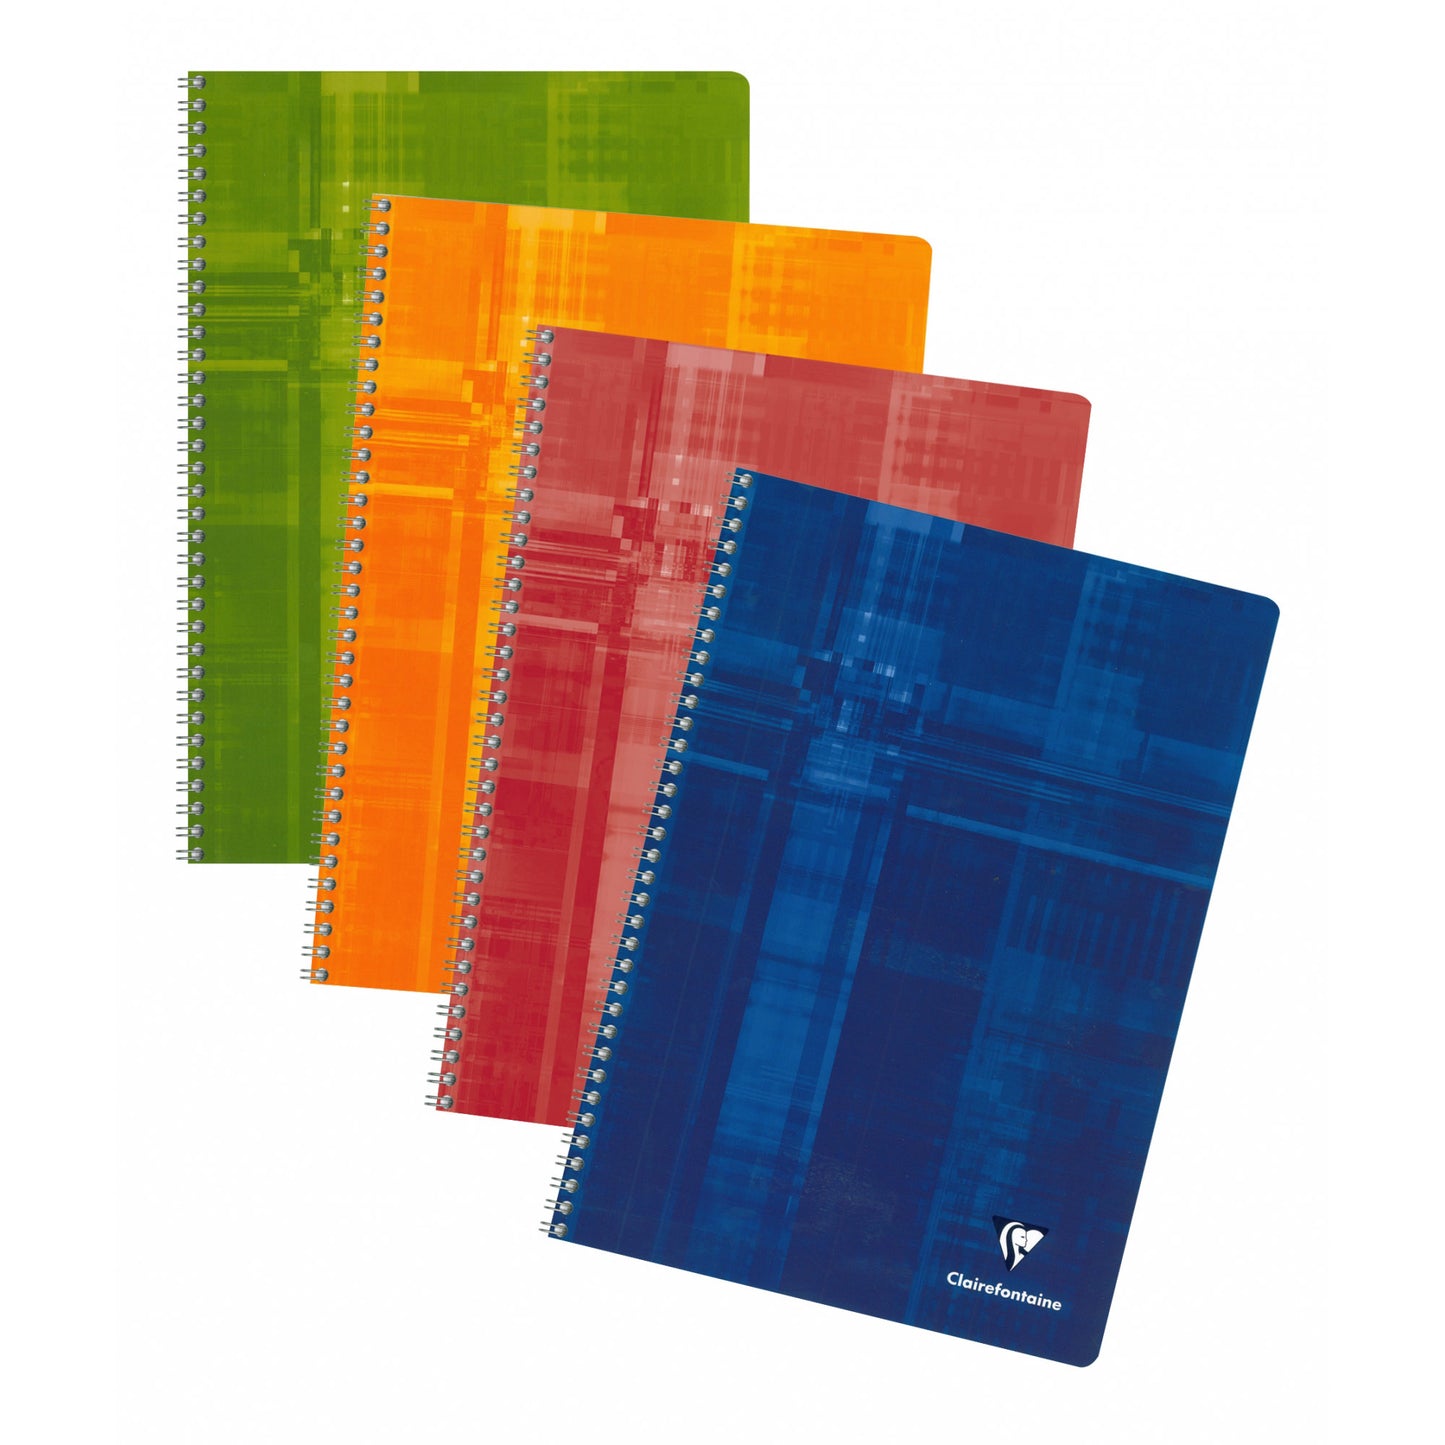 Clairefontaine #68141 Classic French Ruled Wirebound Notebook (8.25 x 11.75) (Assorted)